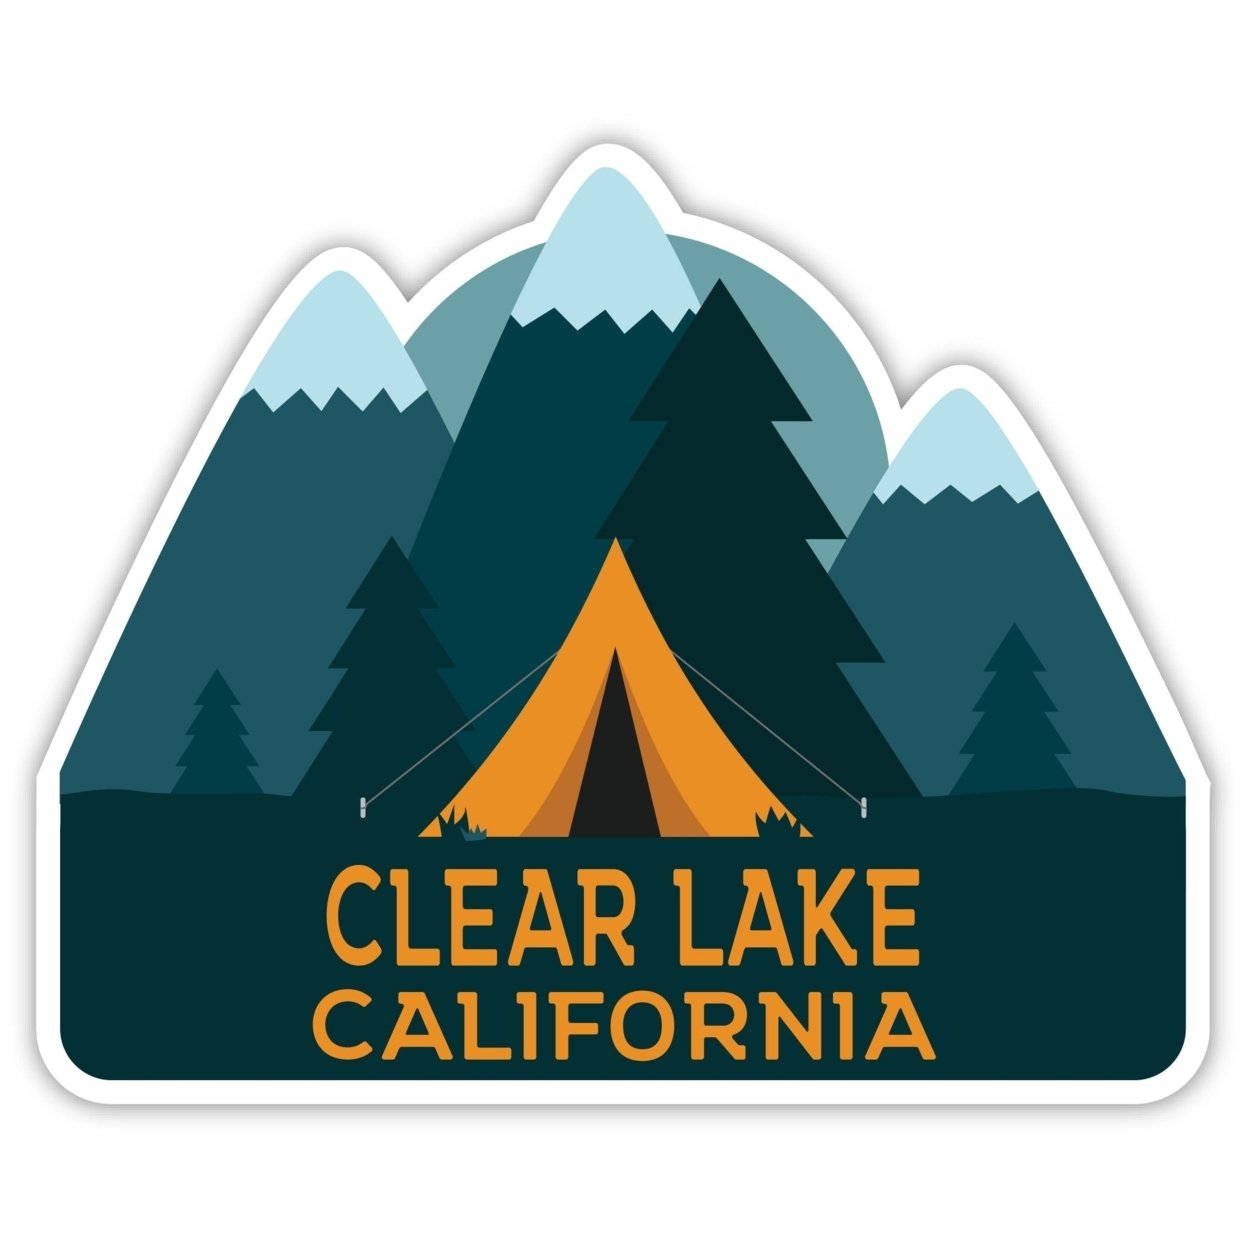 Clear Lake California Souvenir Decorative Stickers (Choose Theme And Size) - 4-Pack, 12-Inch, Tent